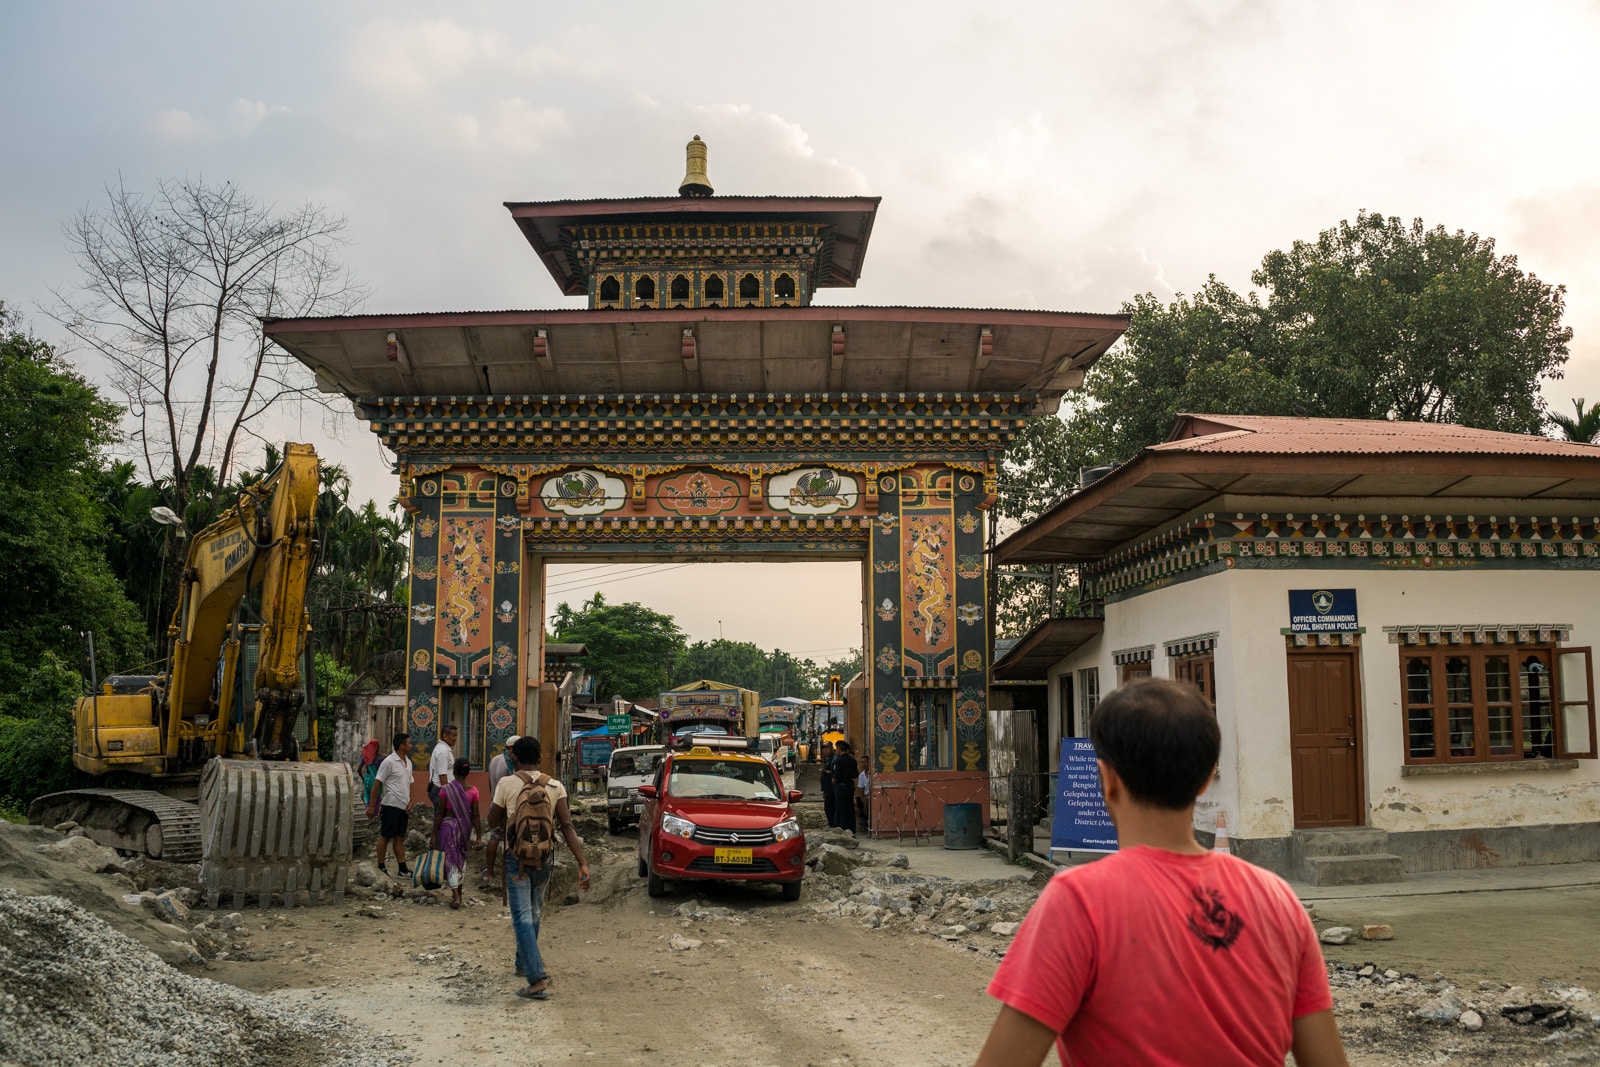 Border gate and cars between the India - Bhutan border crossing at Gelephu - Lost With Purpose travel blog